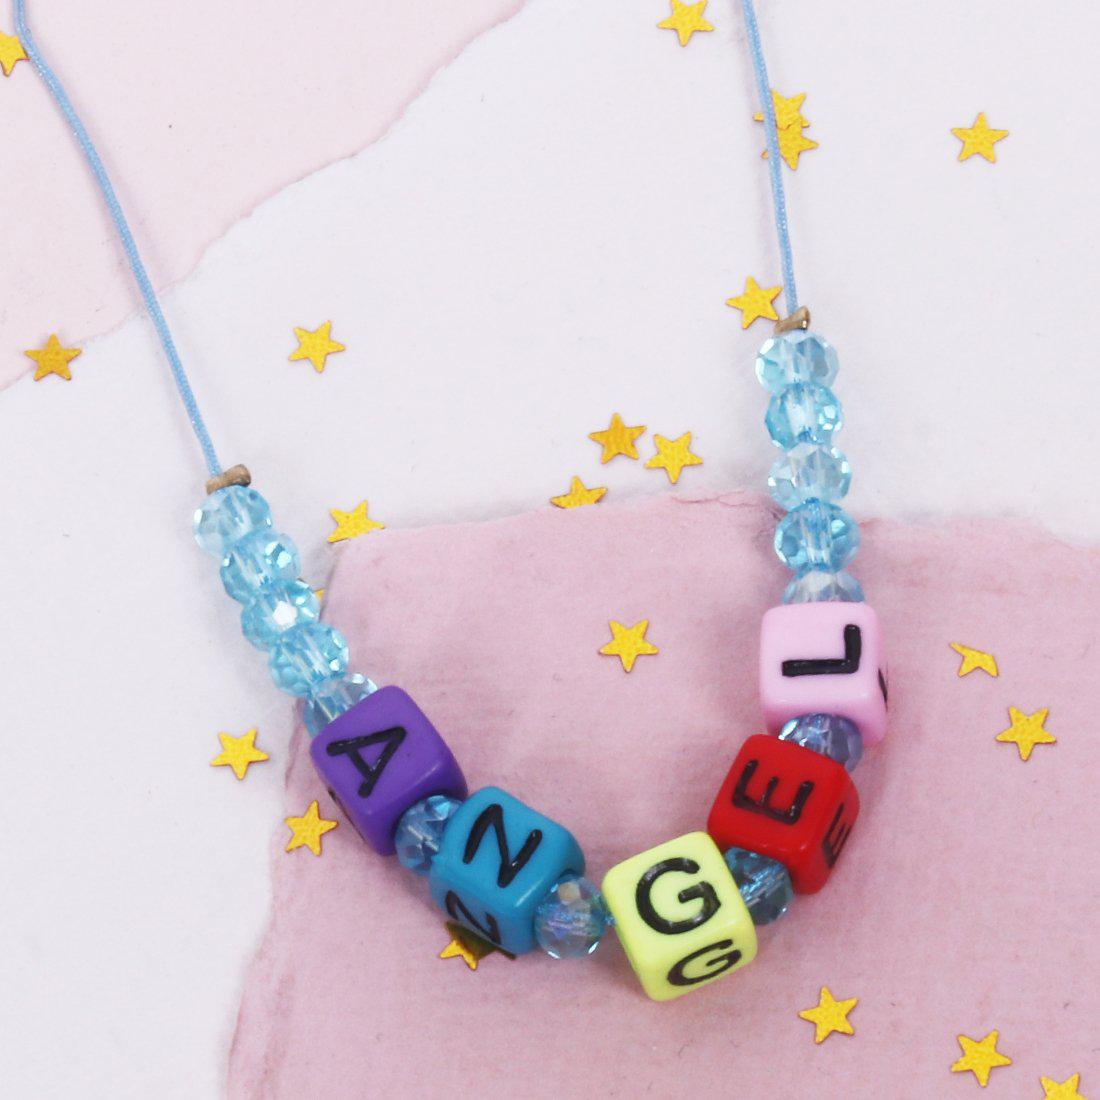 ANGEL LETTERED CHAIN PENDANT NECKLACE